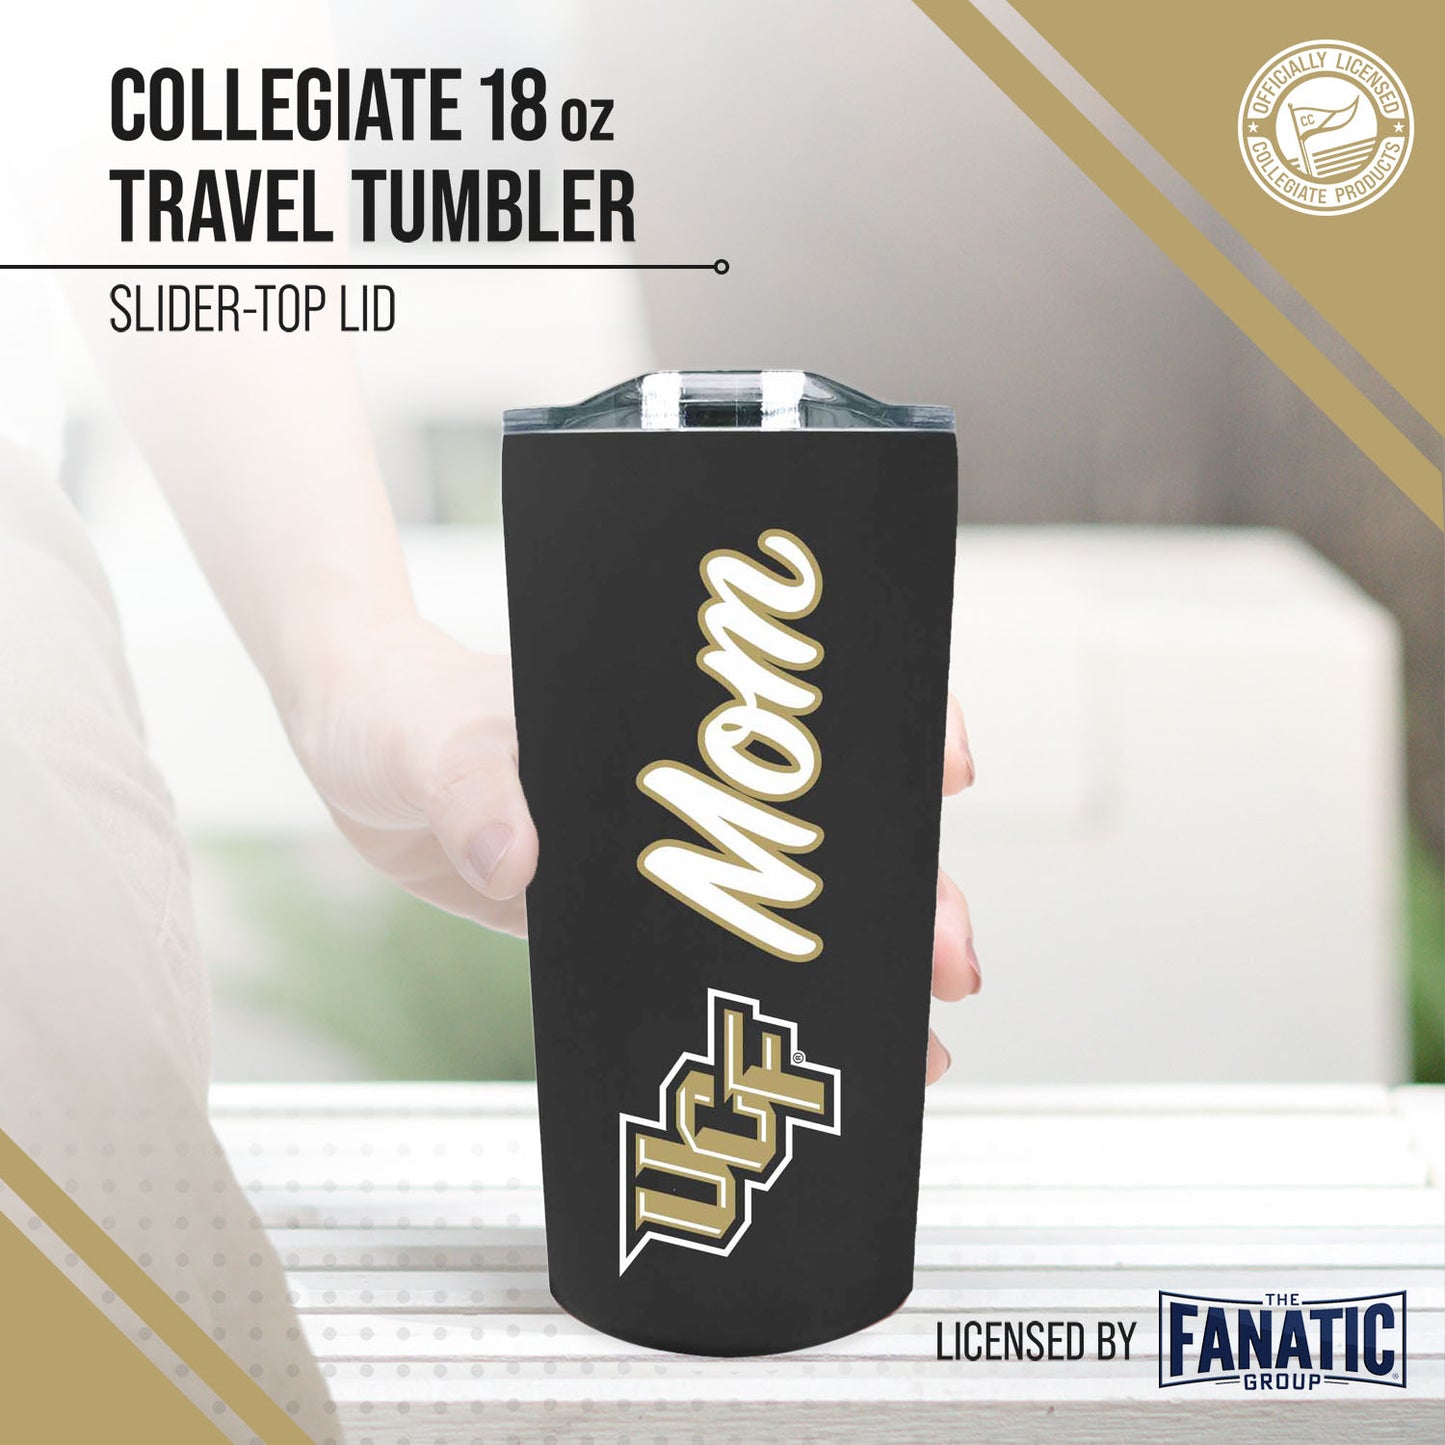 Central Florida Knights NCAA Stainless Steel Travel Tumbler for Mom - Black